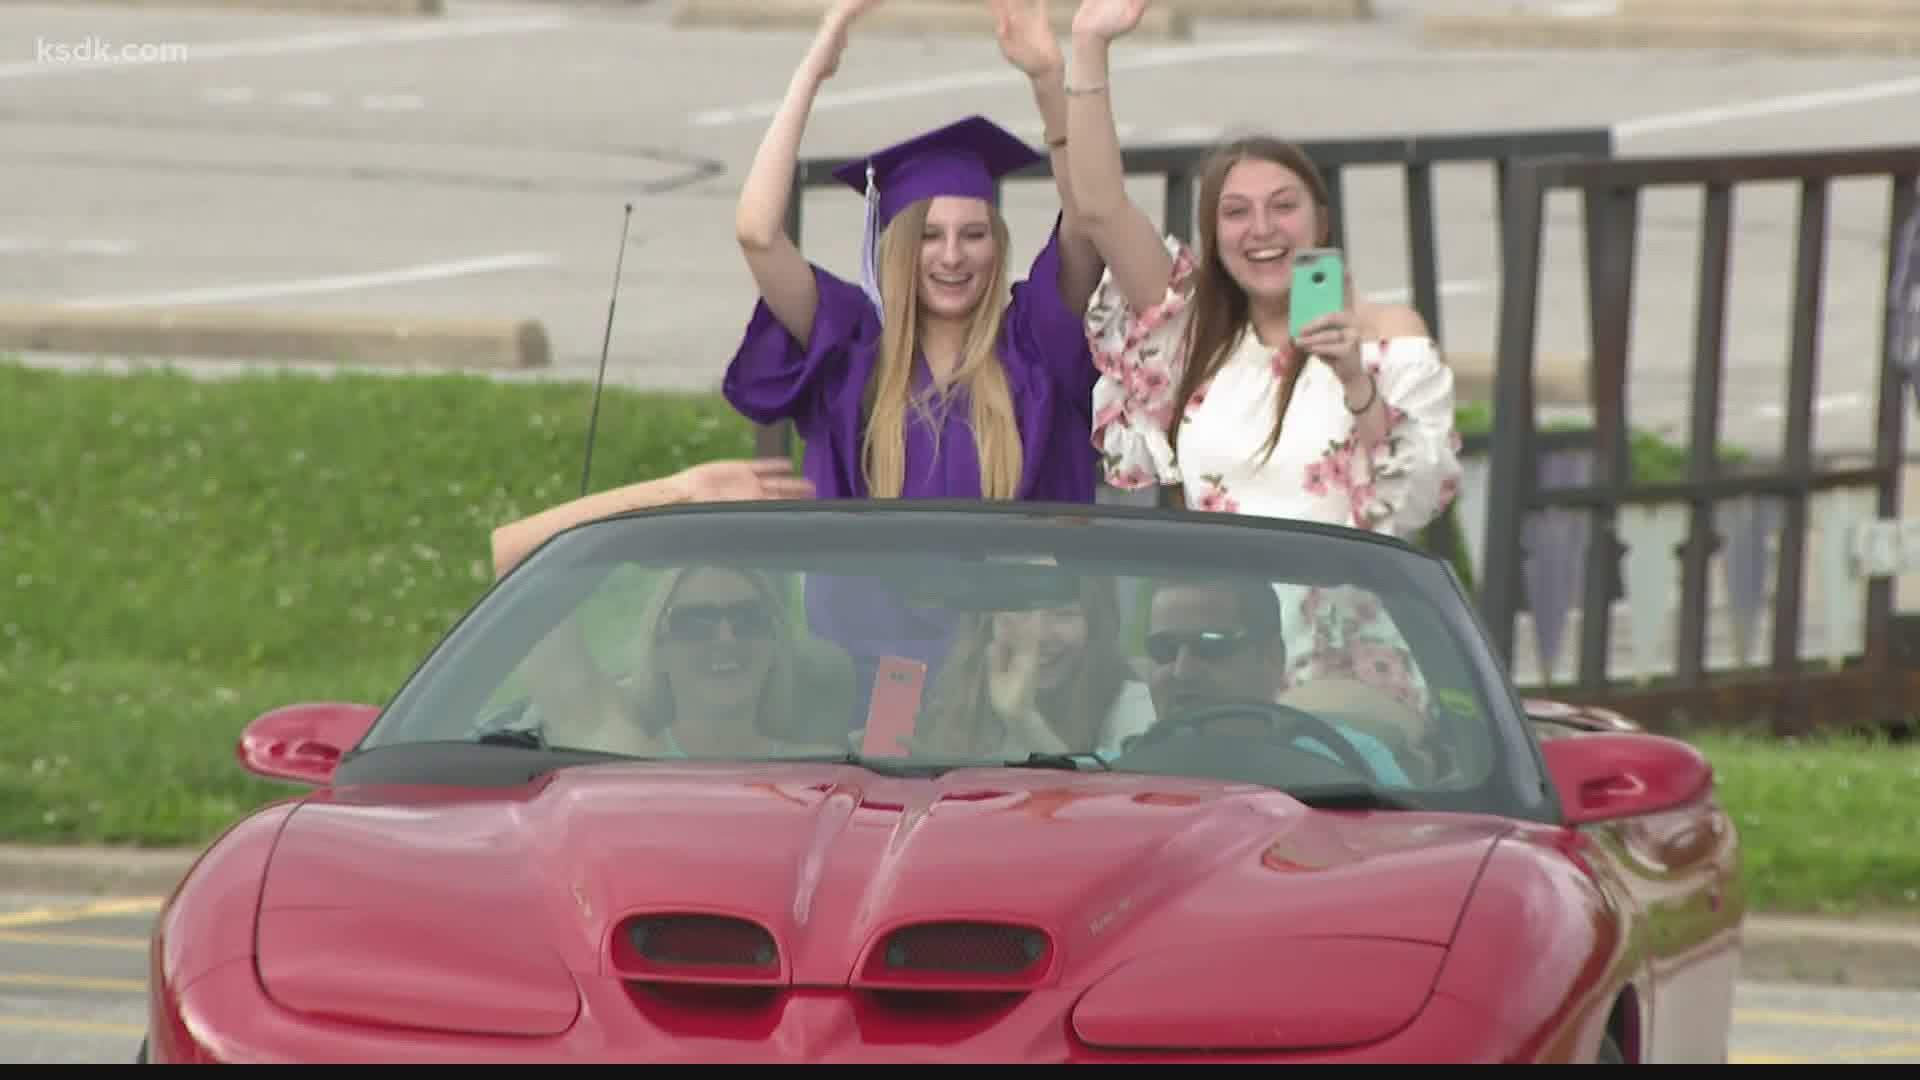 Graduates are driving by in caps and gowns to get their diplomas and have a picture taken.